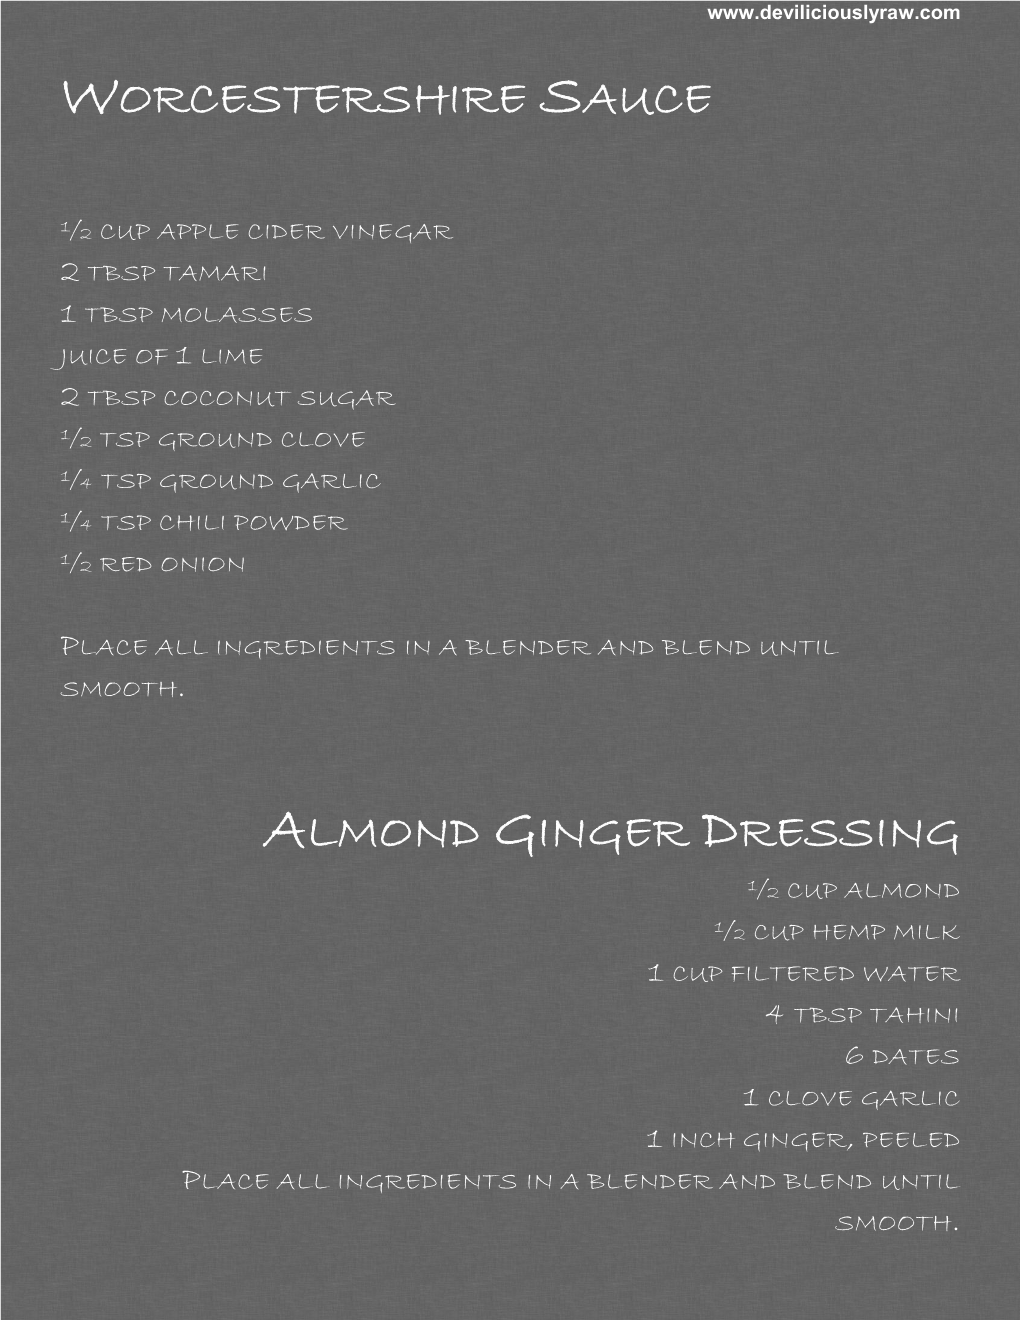 Worcestershire Sauce Almond Ginger Dressing